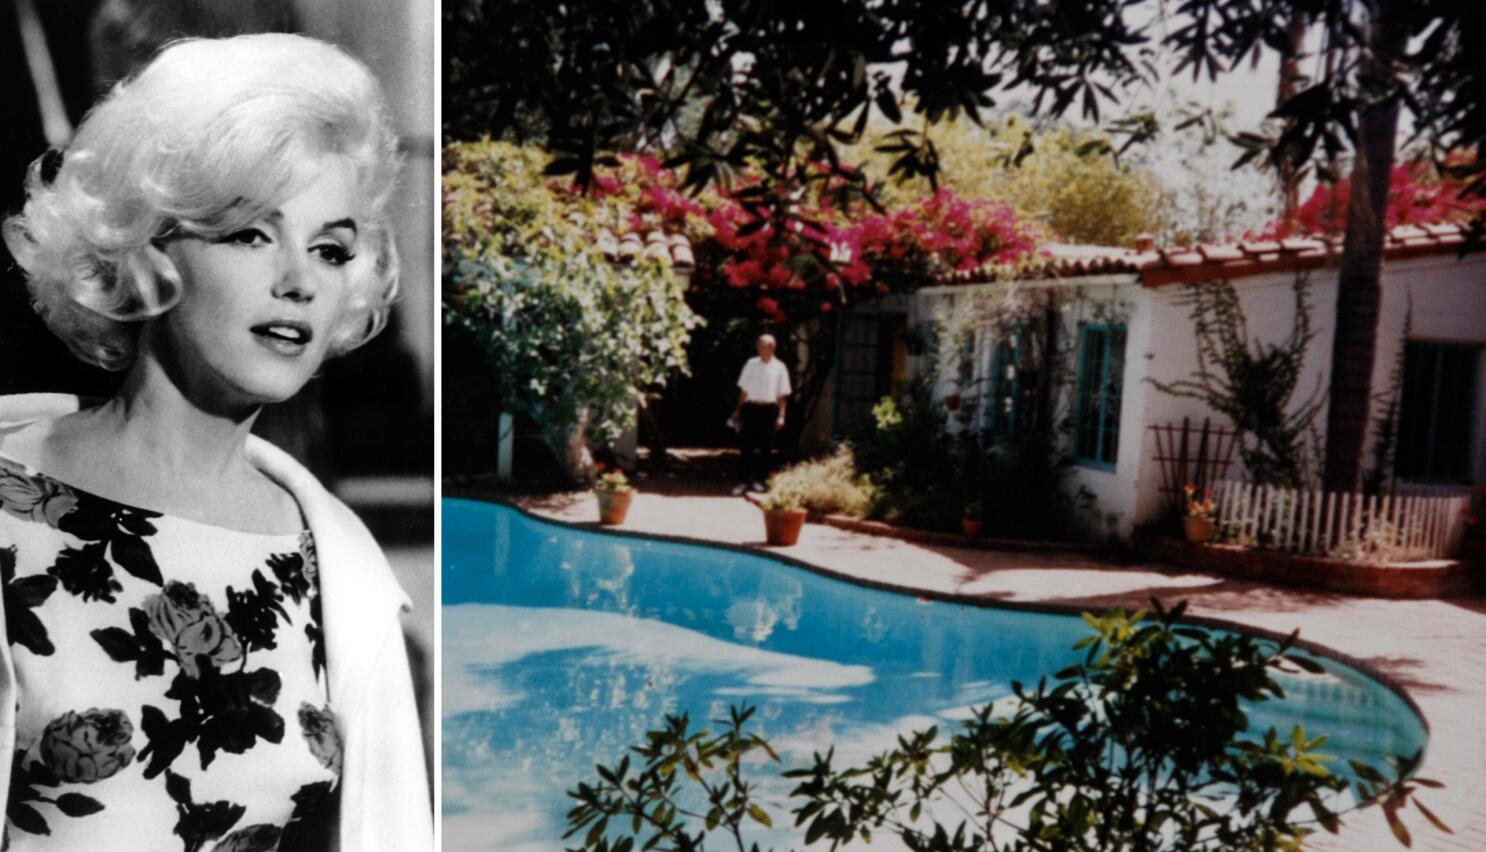 Marilyn Monroe's personal items to be auctioned - 9Style